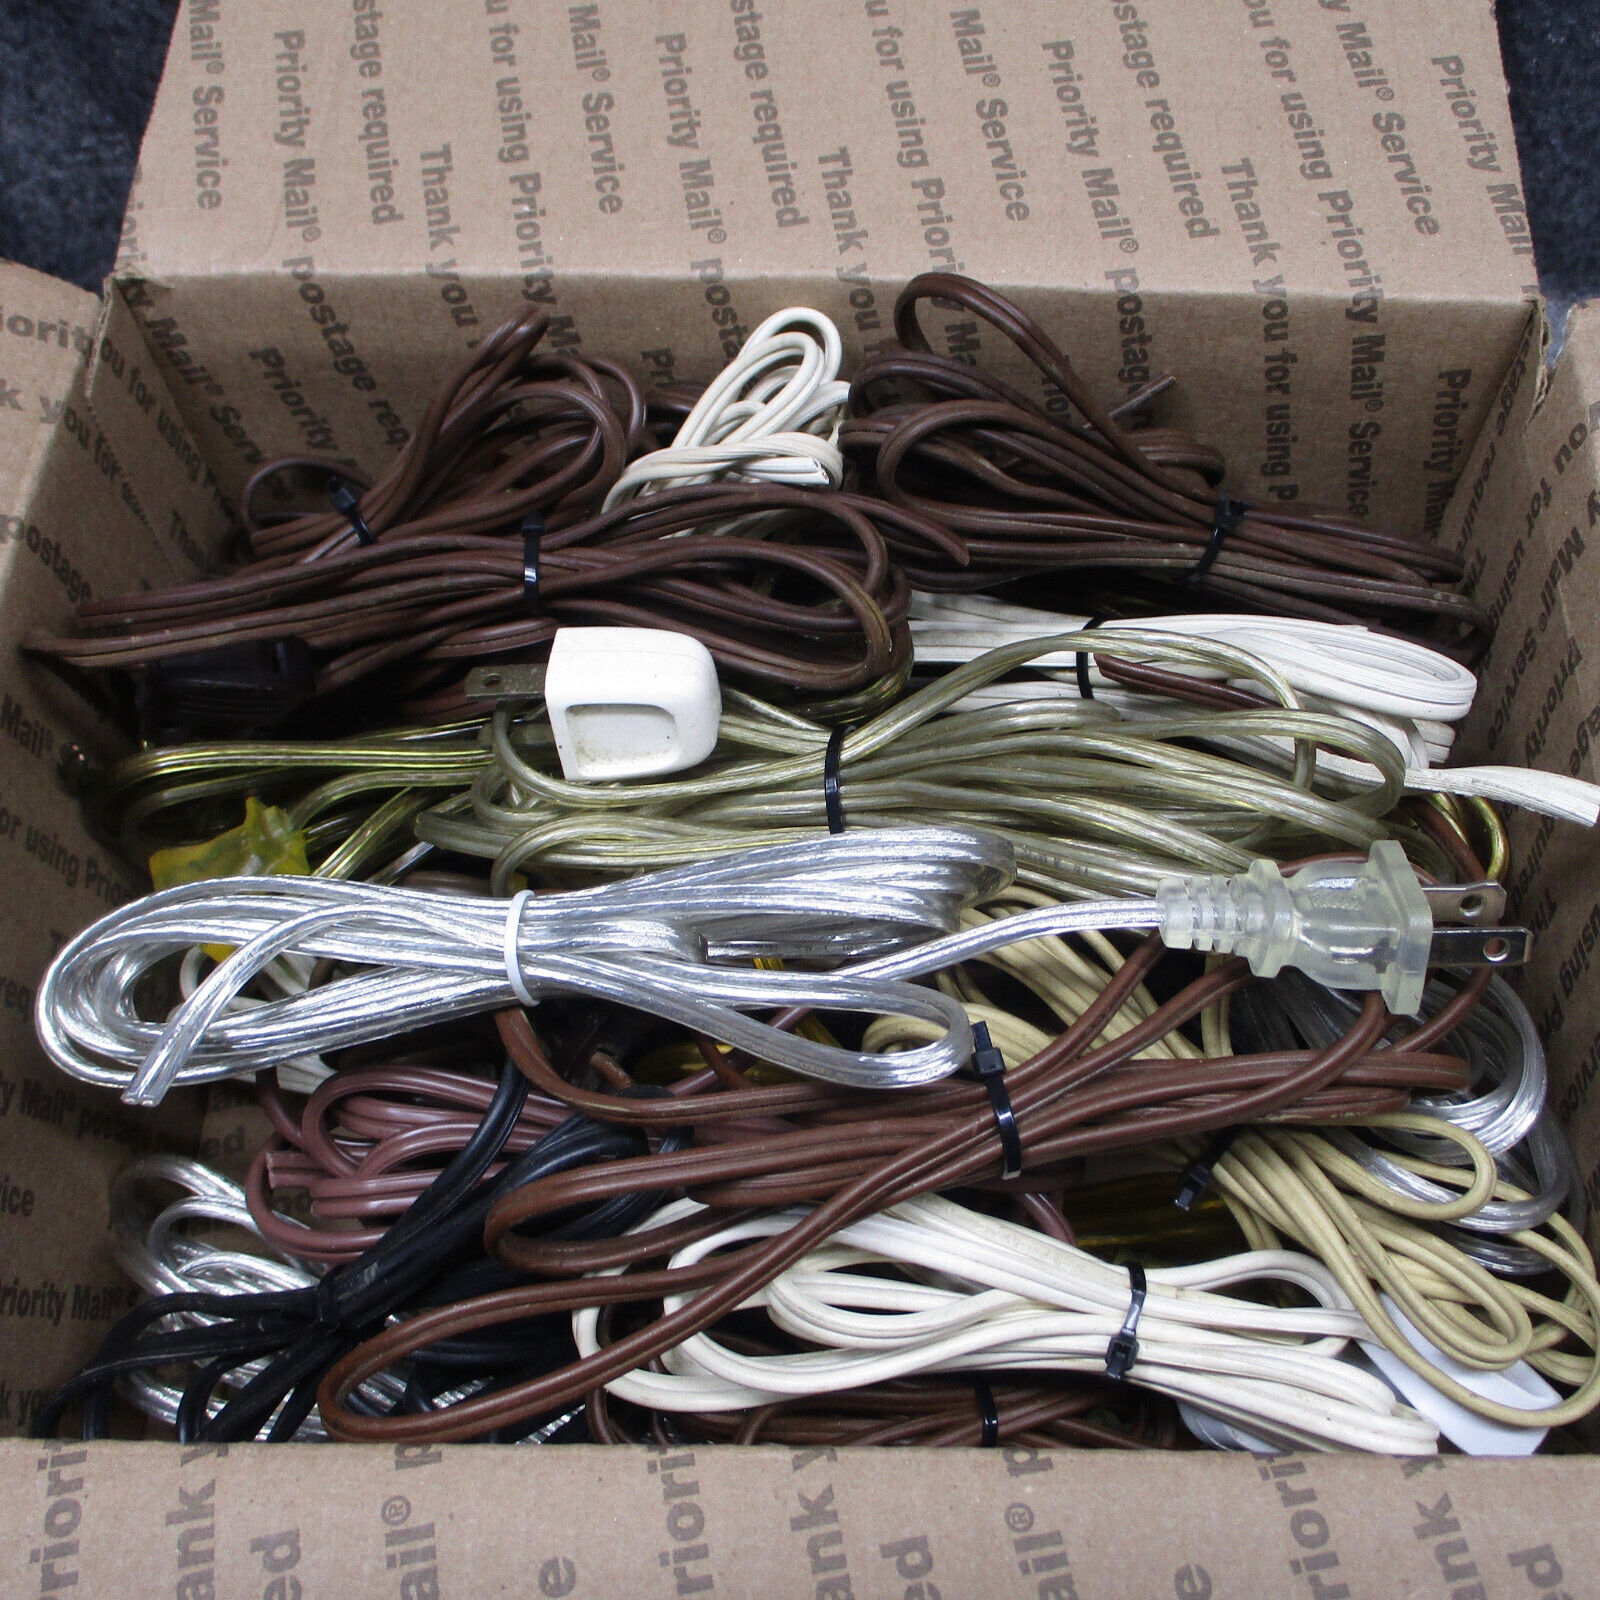 LOT #801:  (32) Salvaged Power Cords, Lamp Wire, Plugs